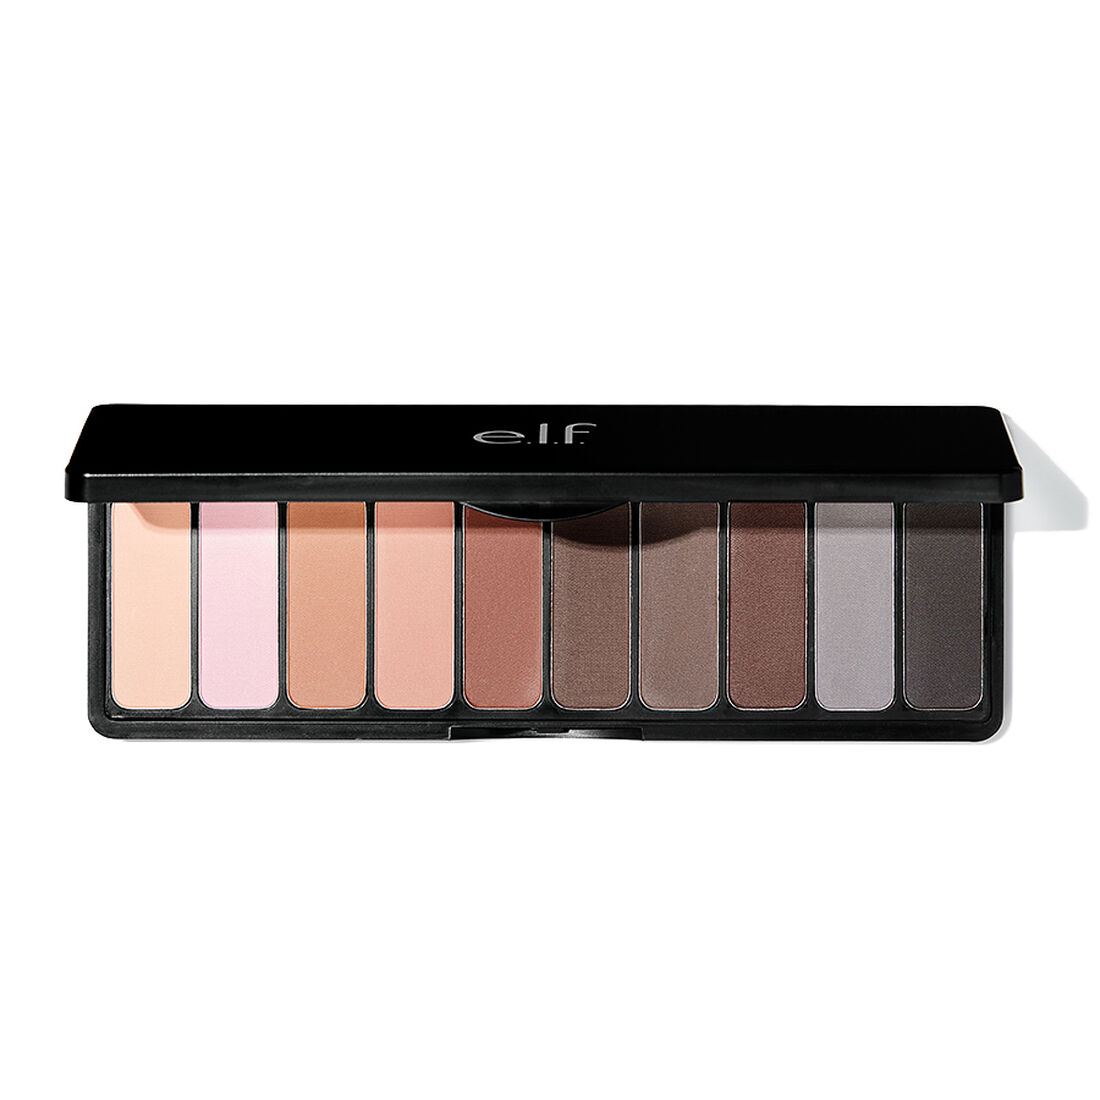 e.l.f. Mad for Matte Eyeshadow Palette - Nude Mood | Old Navy